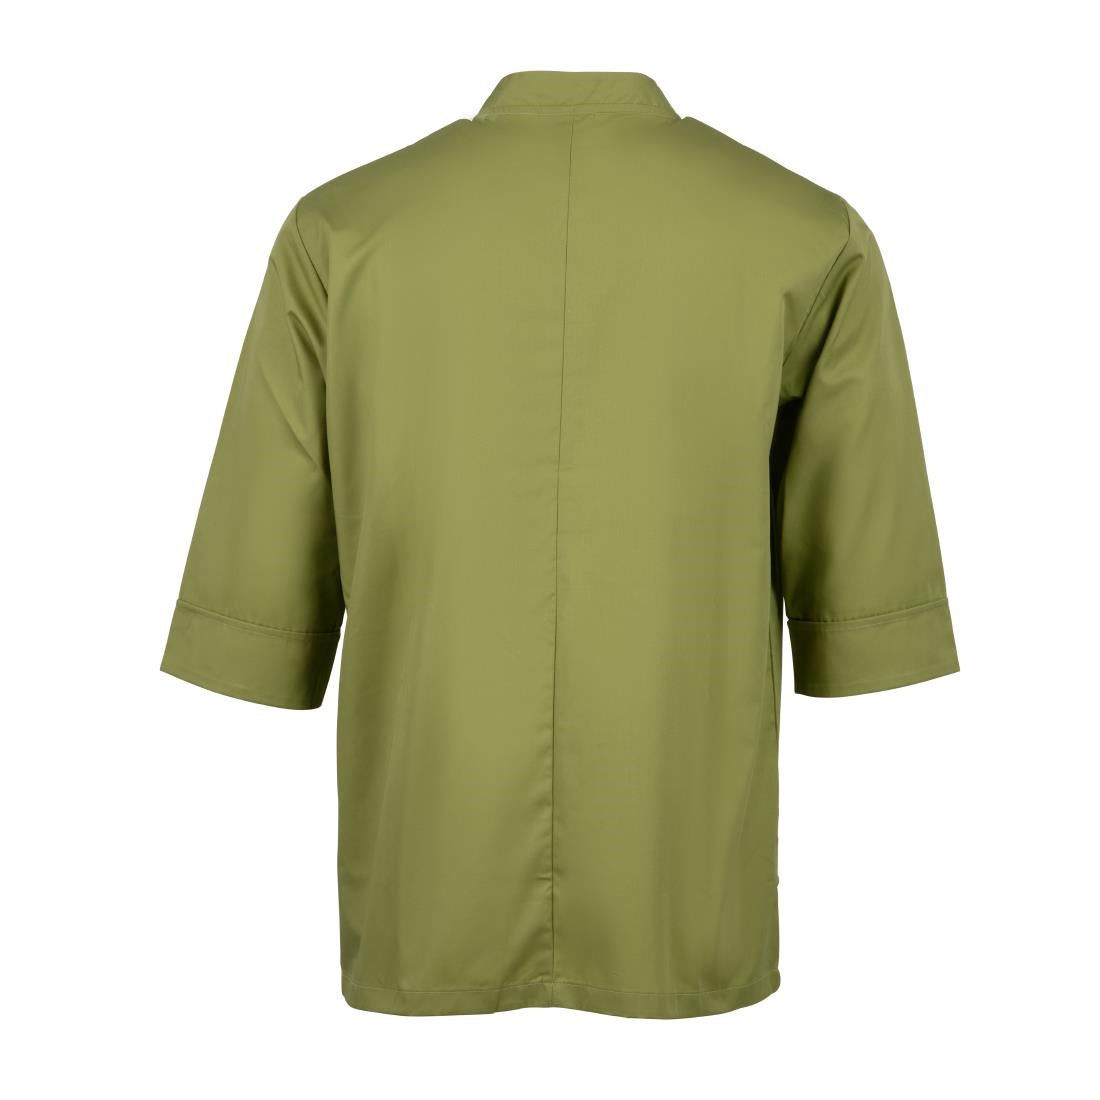 B107-M Chef Works Unisex Chefs Jacket Lime M JD Catering Equipment Solutions Ltd